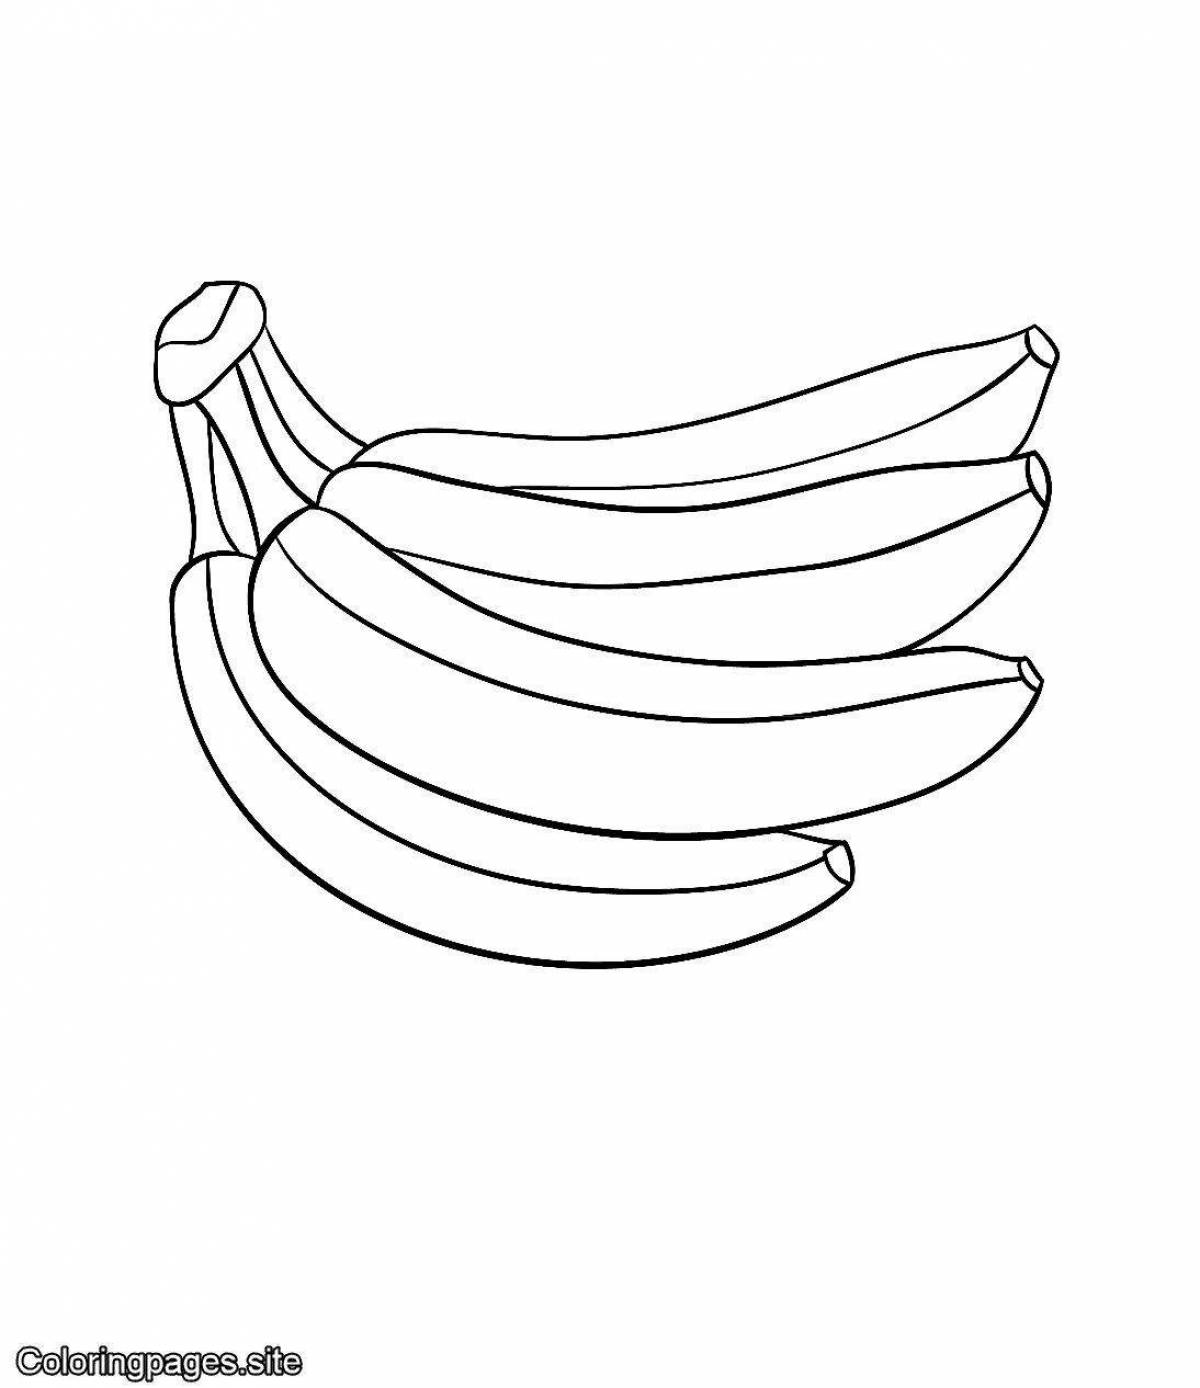 Glowing banana coloring book for 5-6 year olds